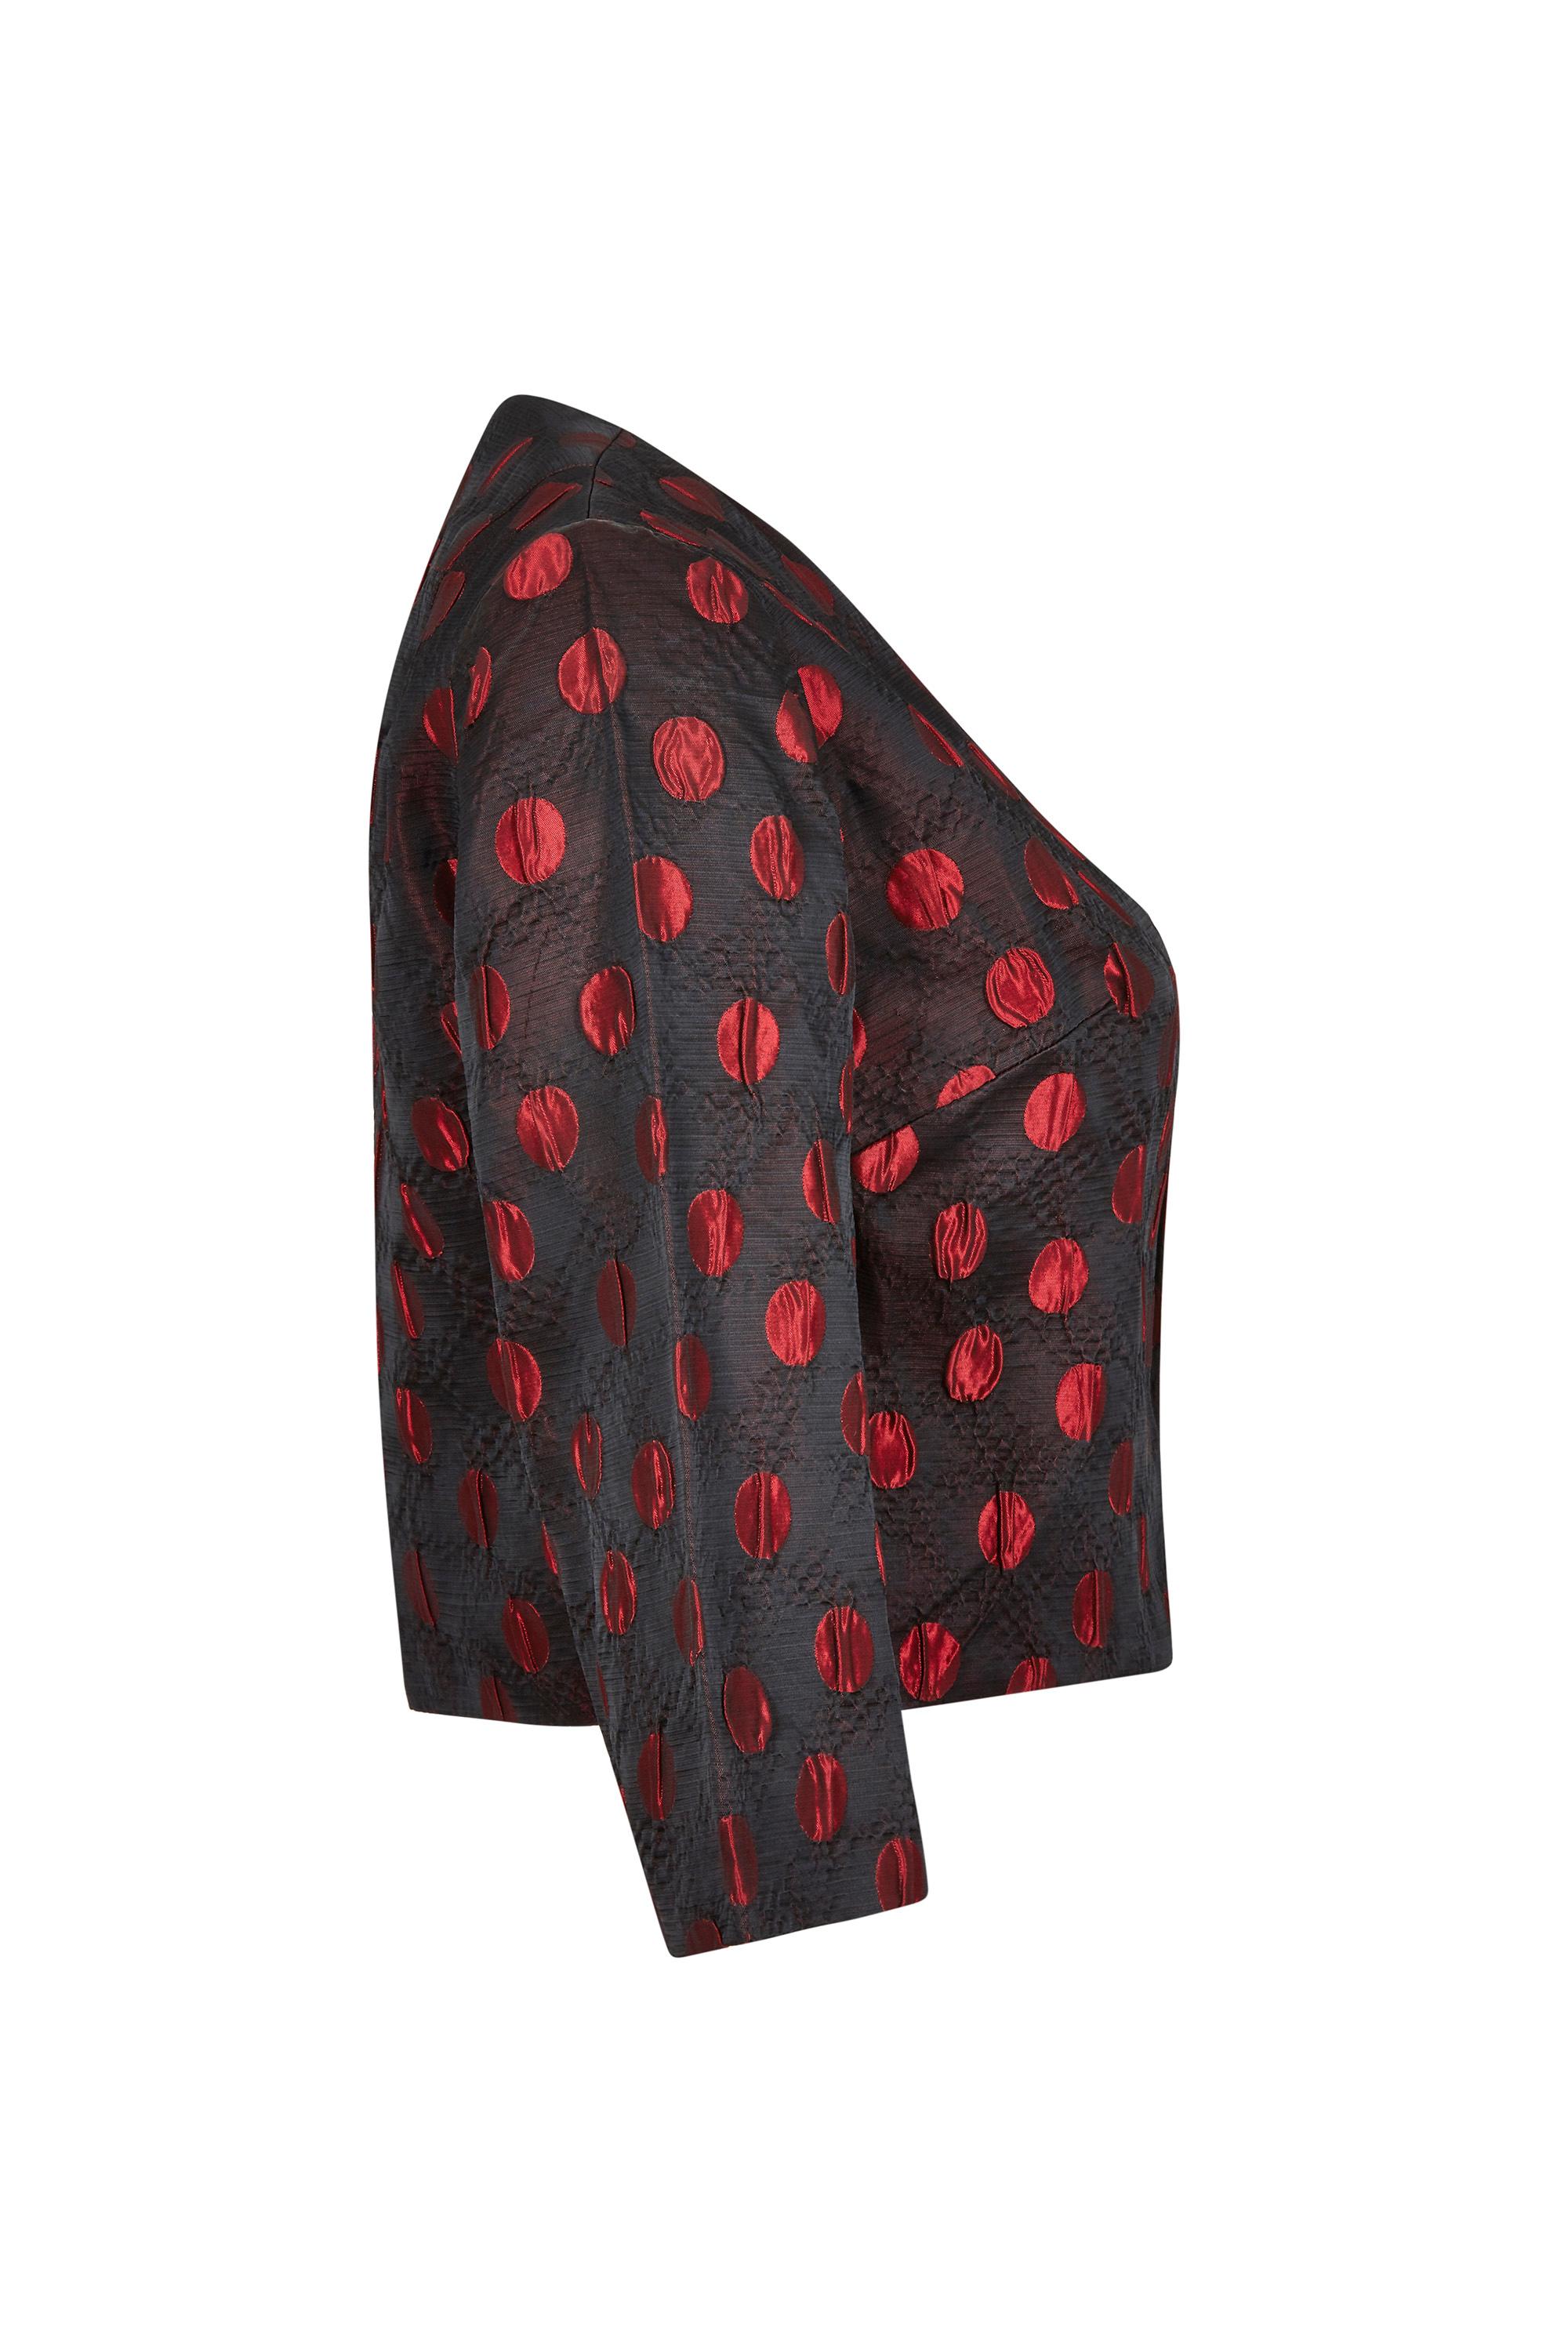 1960s Black and Red Polka Dot Demi Couture Dress and Jacket For Sale 4